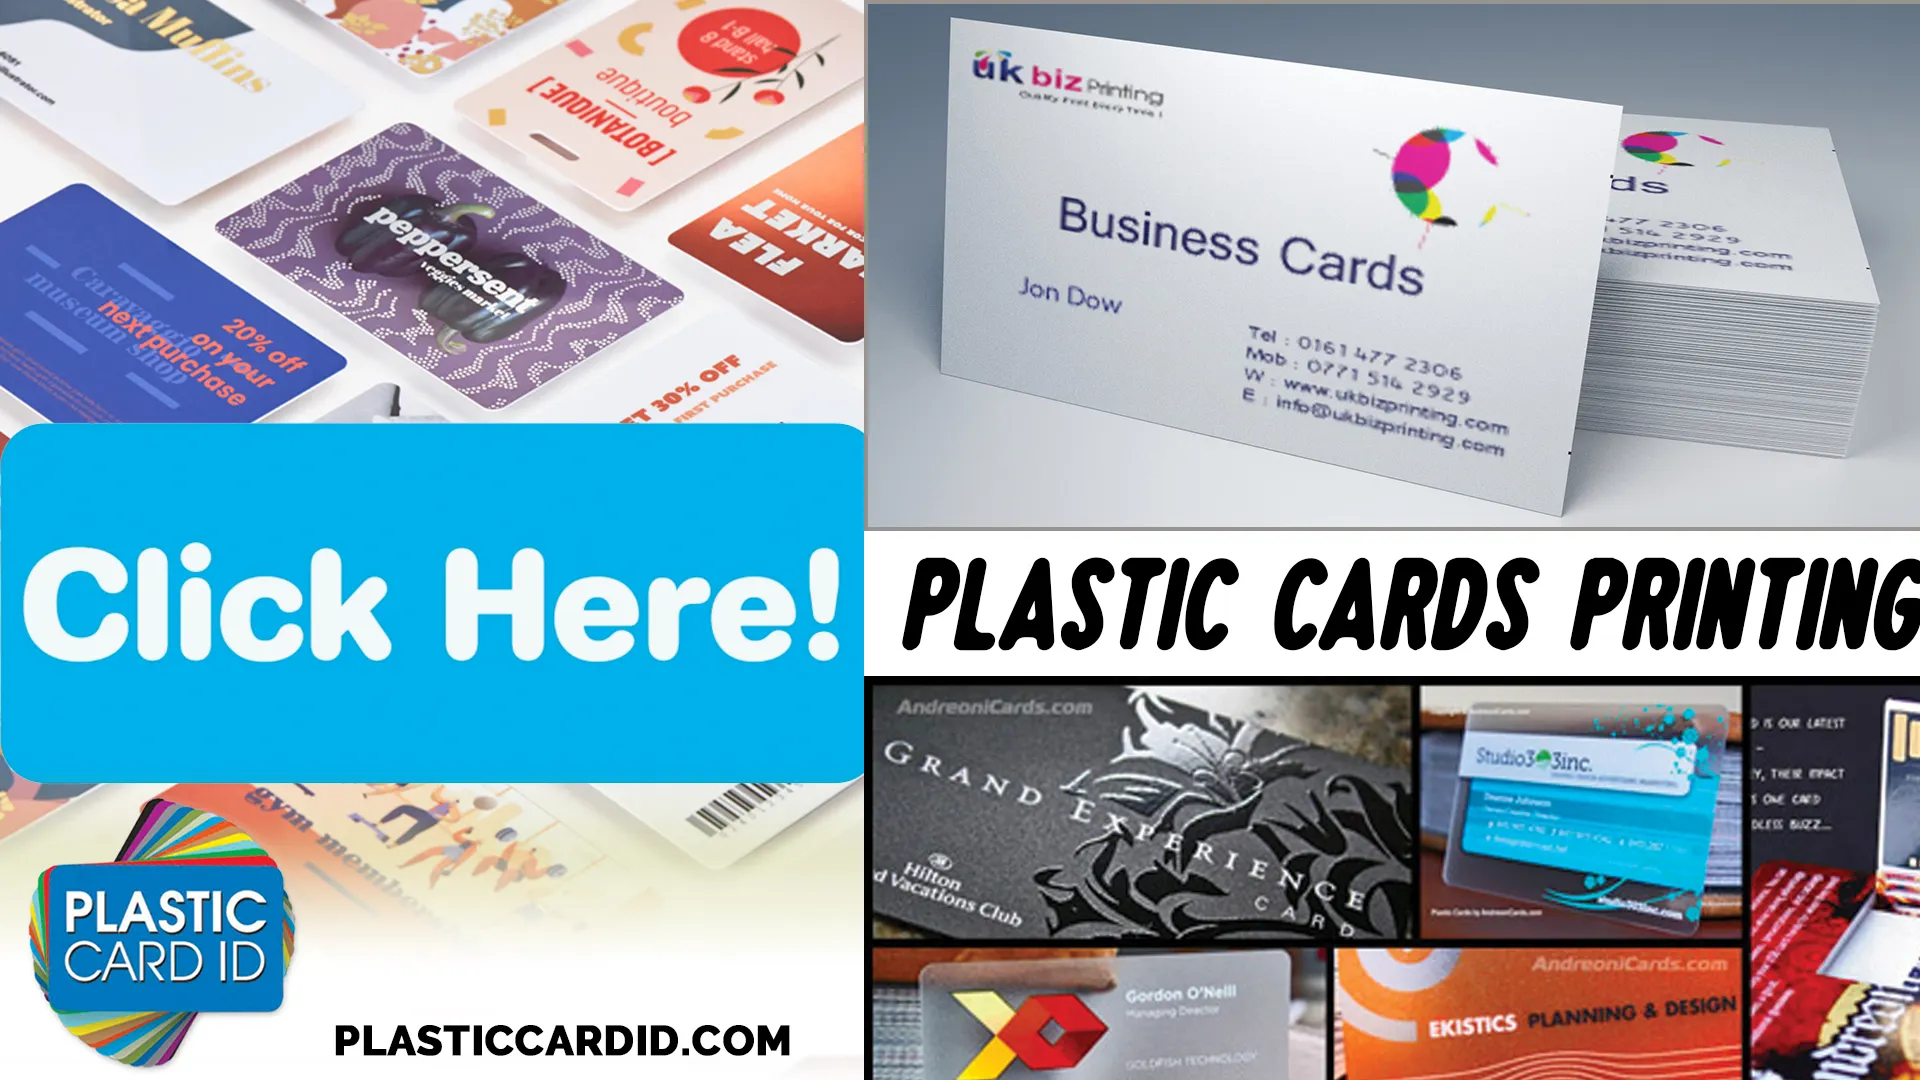 Maximizing Event Engagement with Plastic Cards